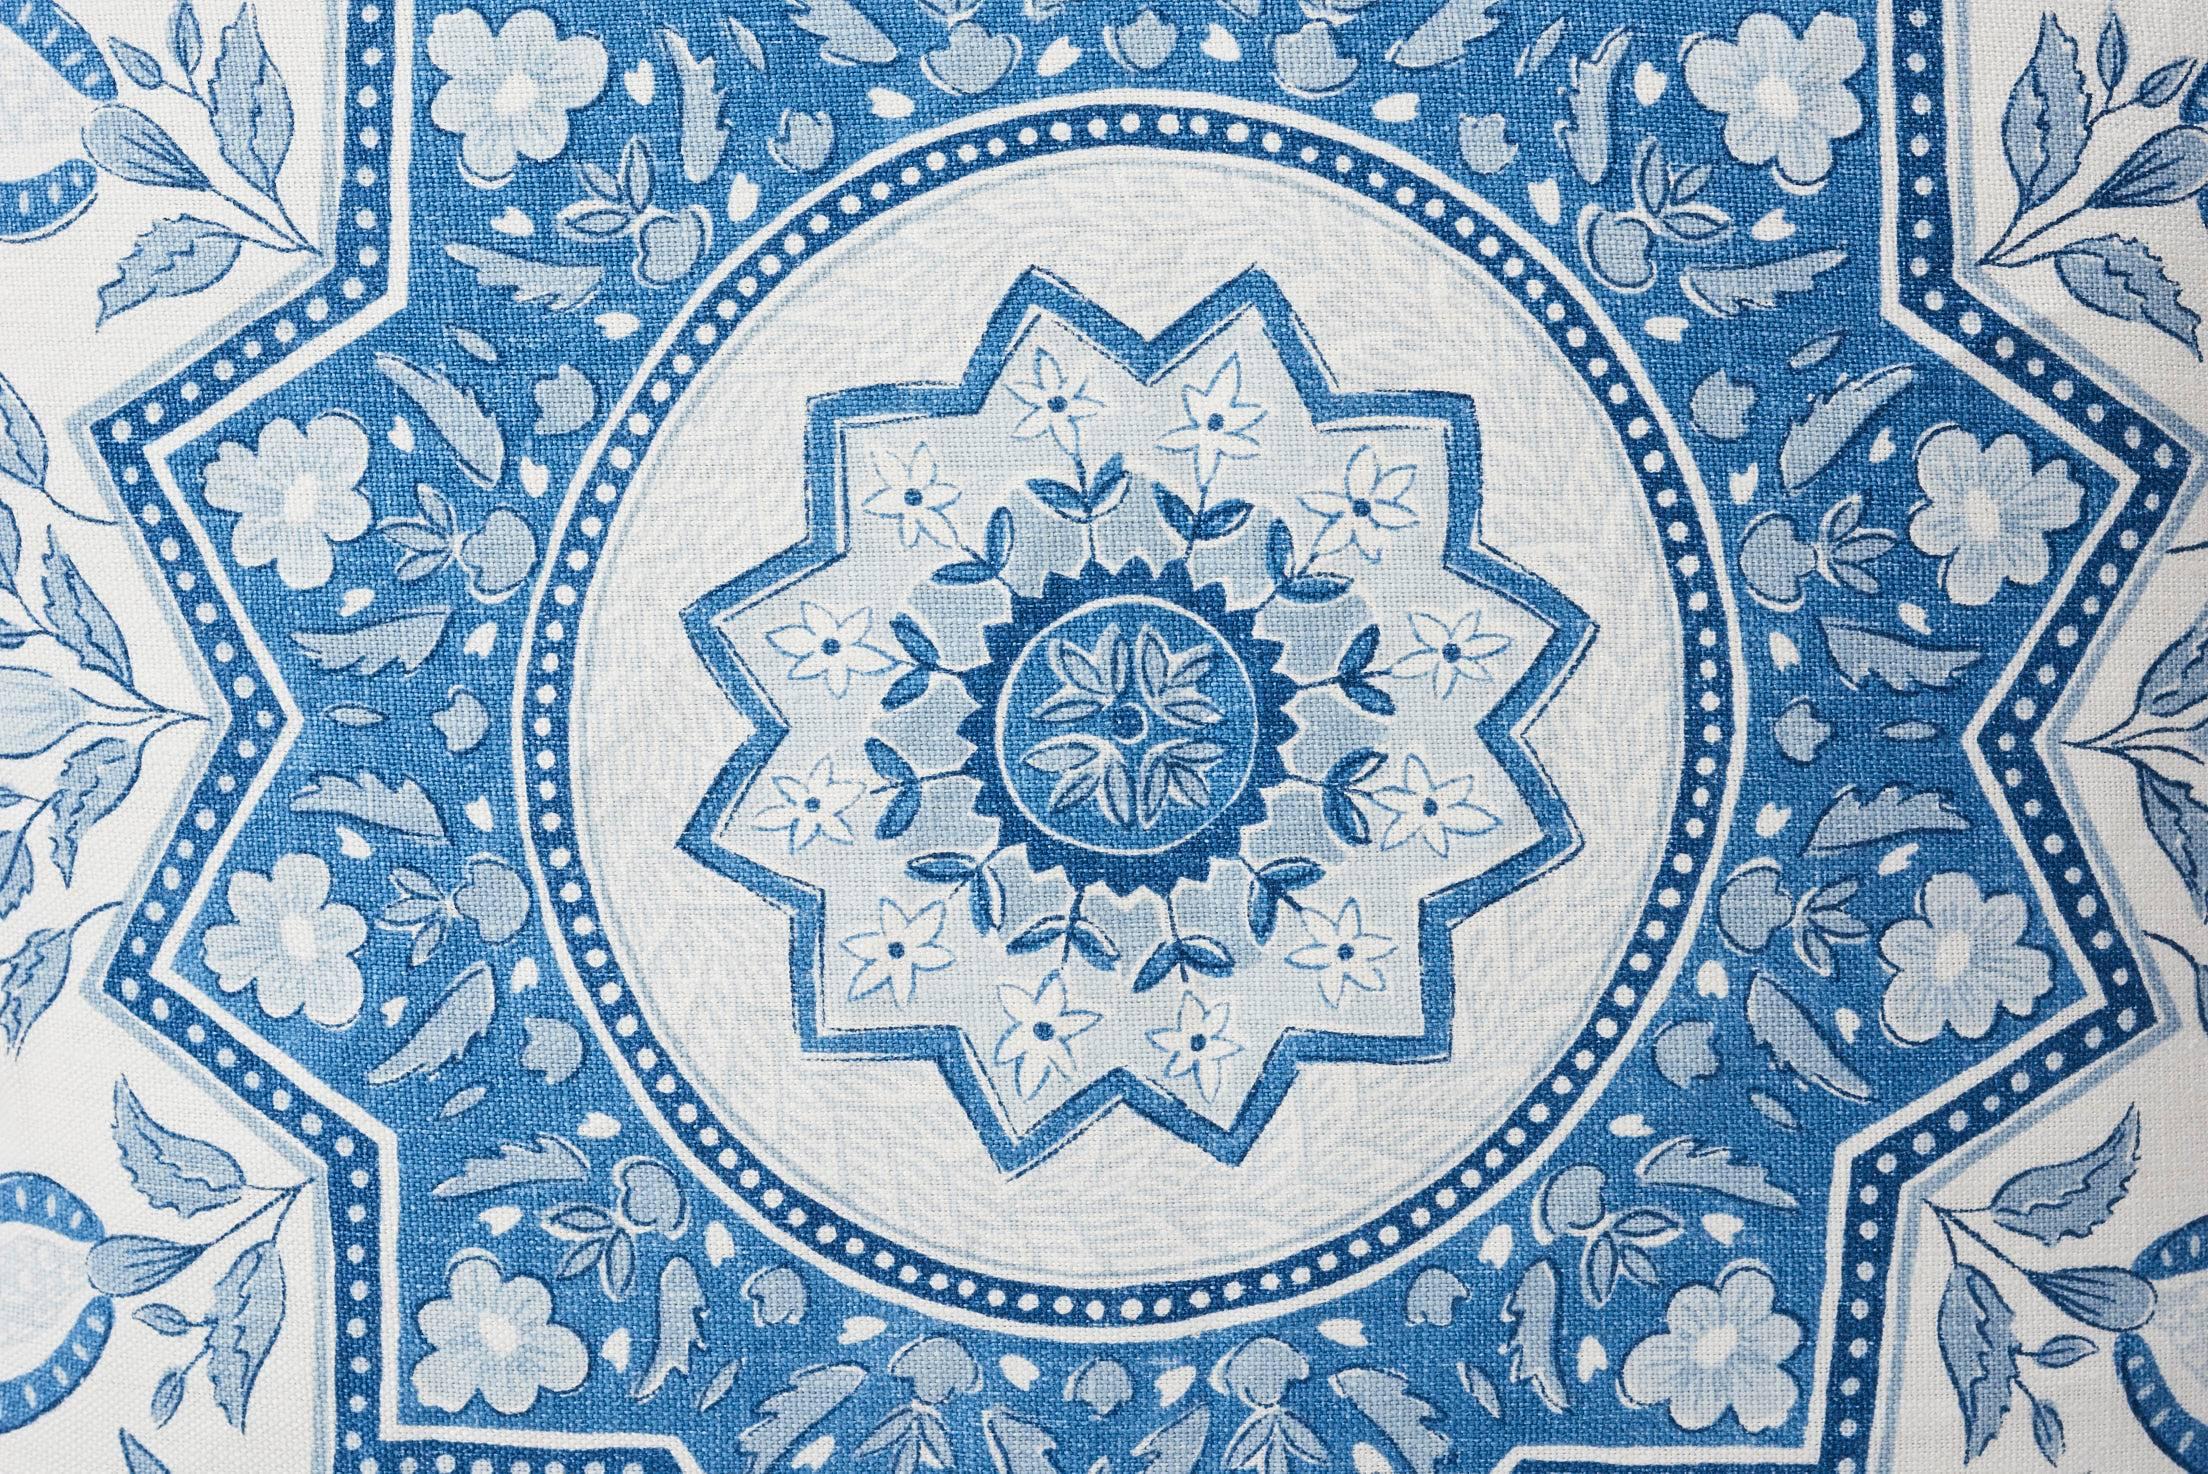 This stunning large-scale medallion evokes timeless motifs from India and Turkey for a chic, global vibe. Part of the Mark D. Sikes collection, this pattern is now featured as an exquisite decorative accent, which is sure to enliven any interior or